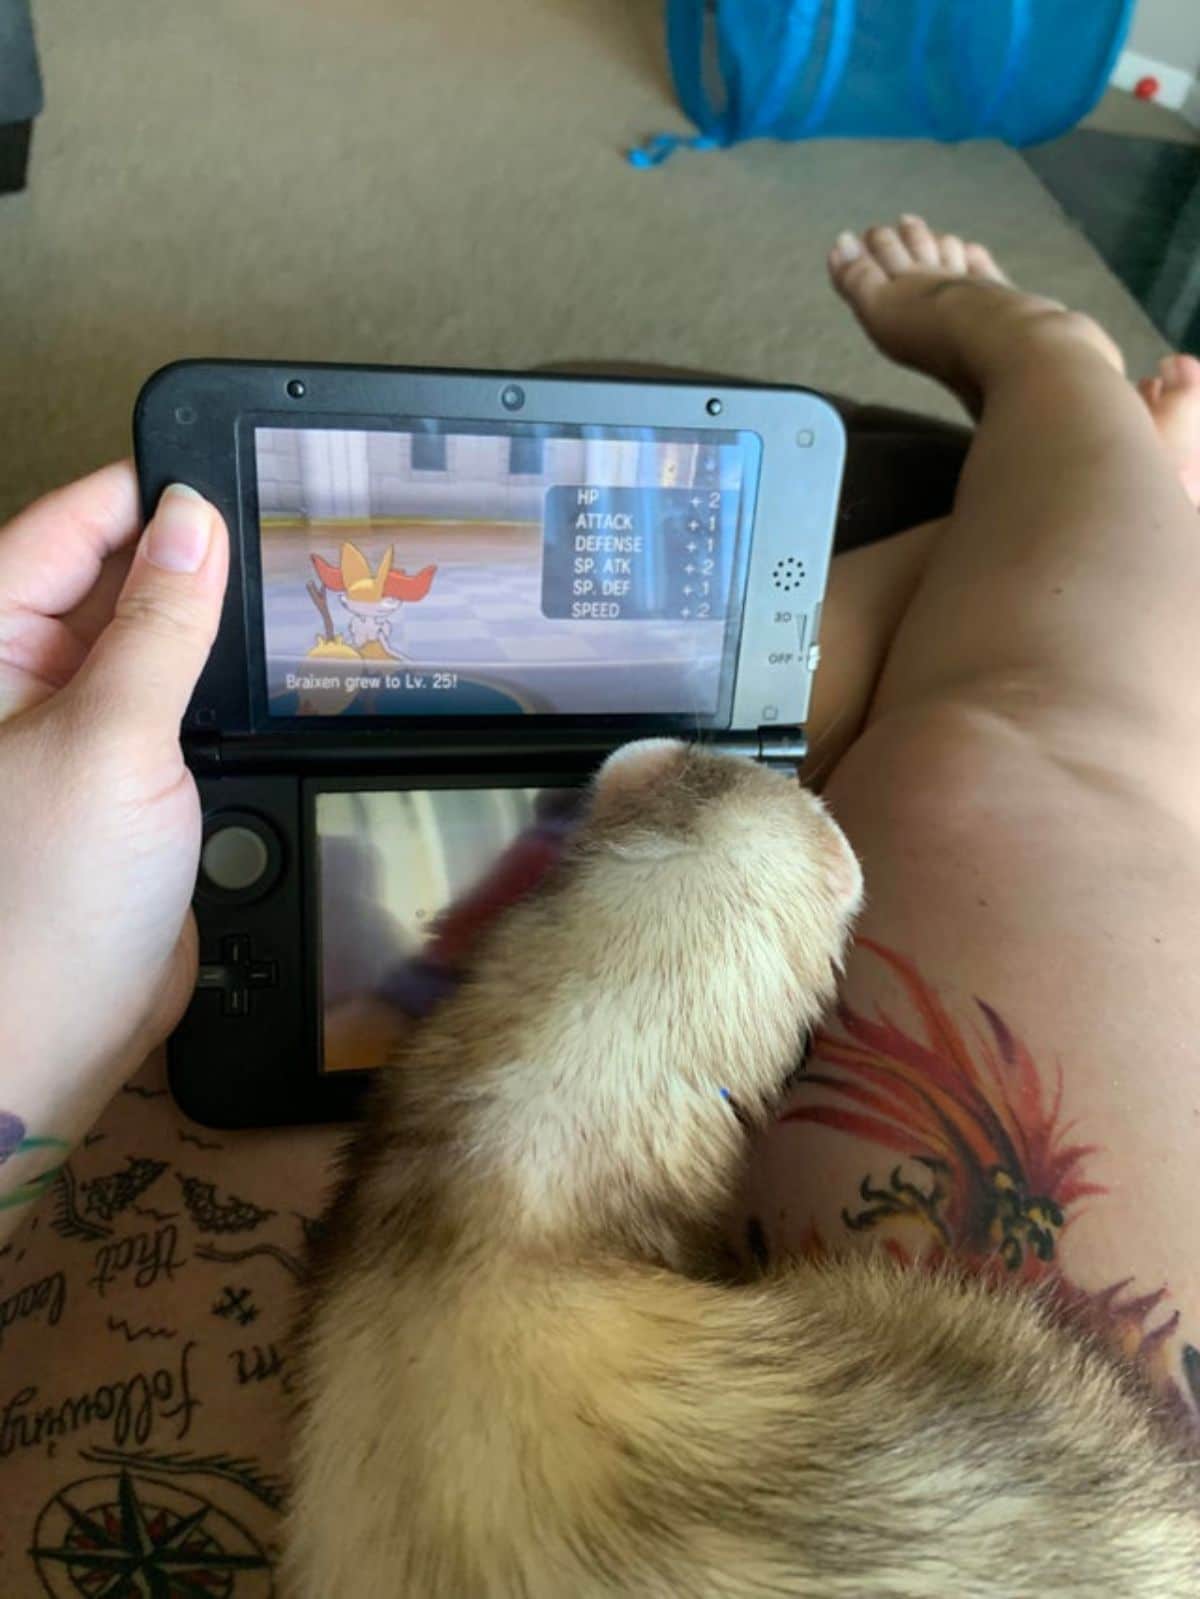 brown ferret on someone's lap with the face against the game the person is playing